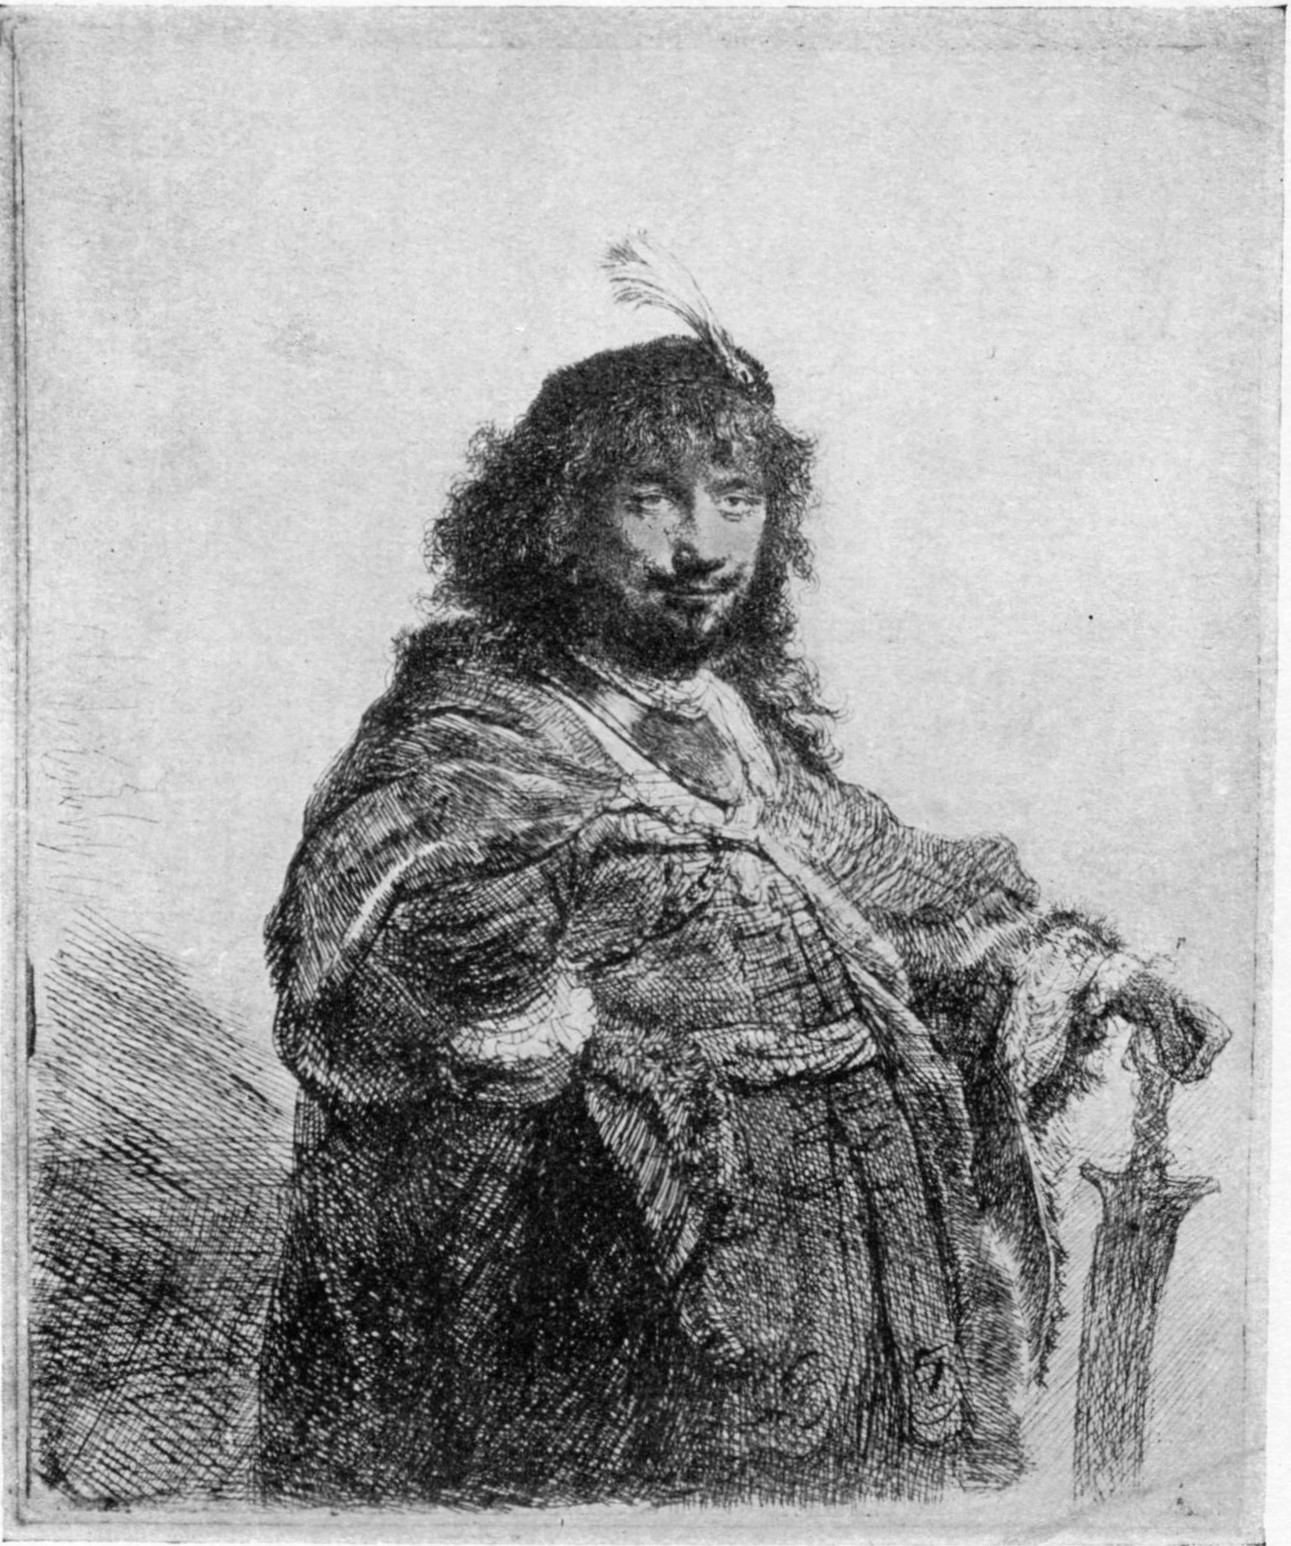 110, I. REMBRANDT WITH PLUMED HAT, AND SABRE. 1634. B. 23. This plate was afterwards cut down to a bust in an oval.